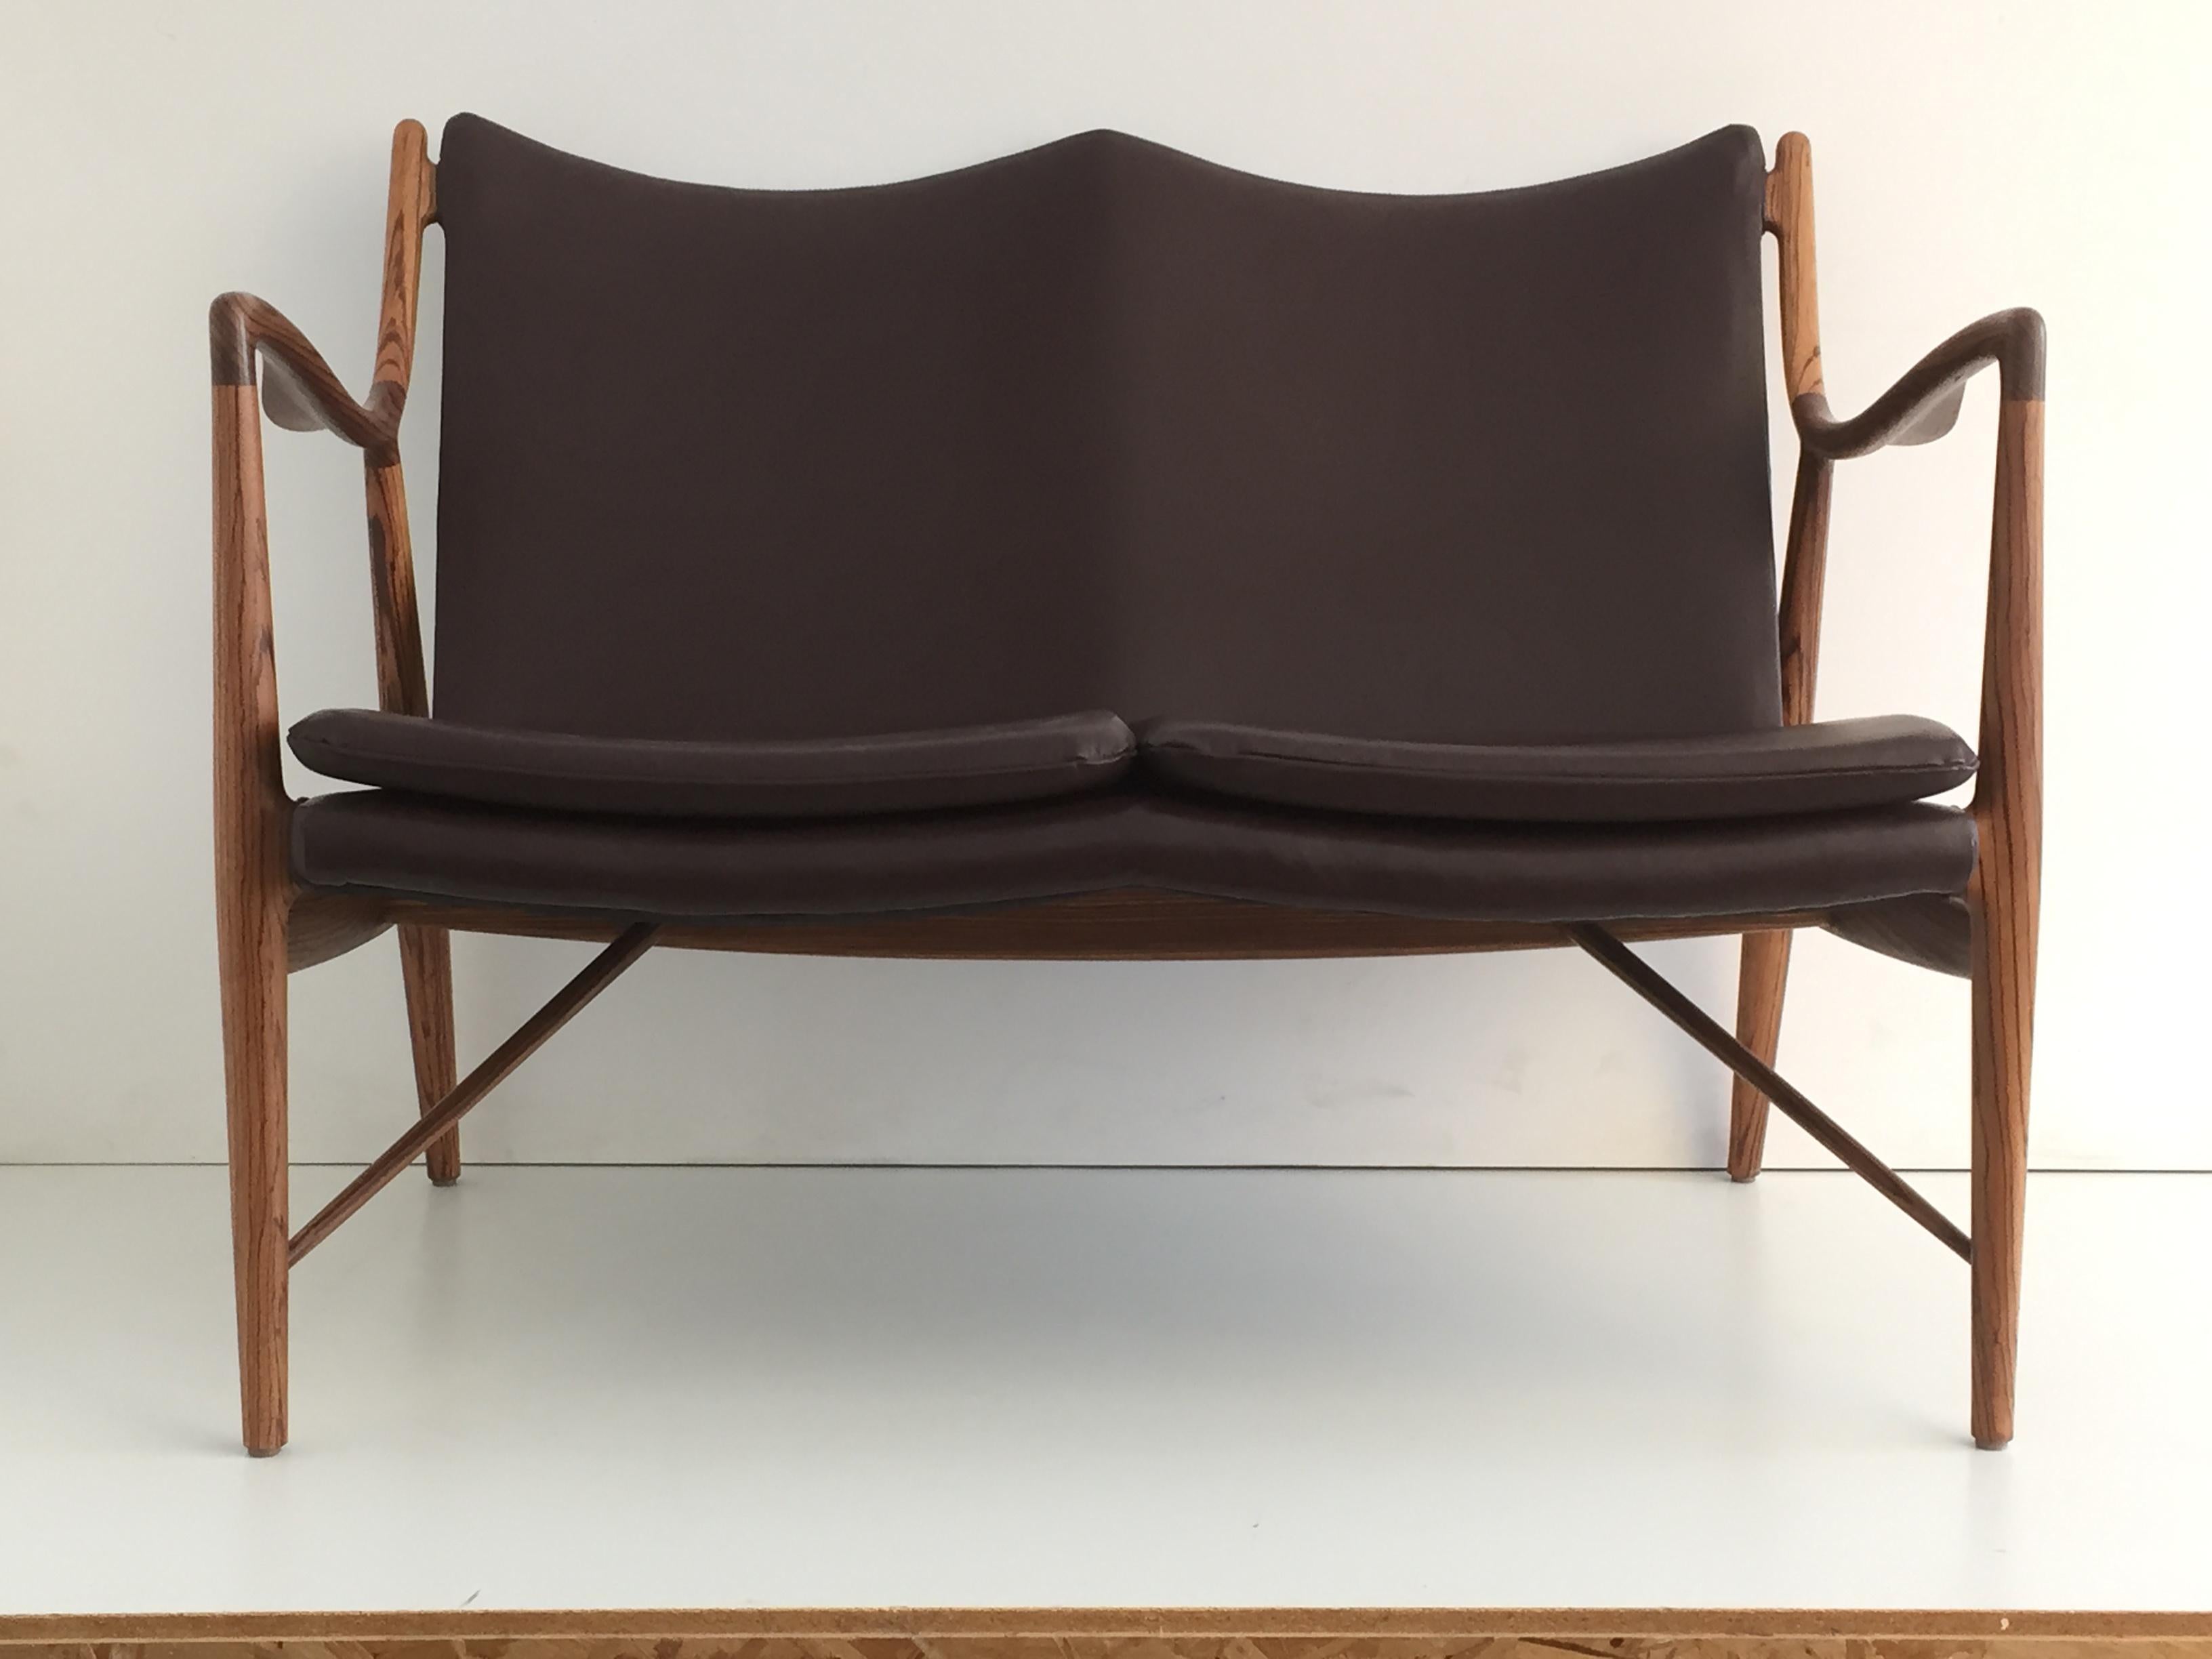 Mid-Century Modern style zebra wood settee in the manner of Finn Juhl. Made in 1990s in solid zebra wood and upholstered in dark brown leather.